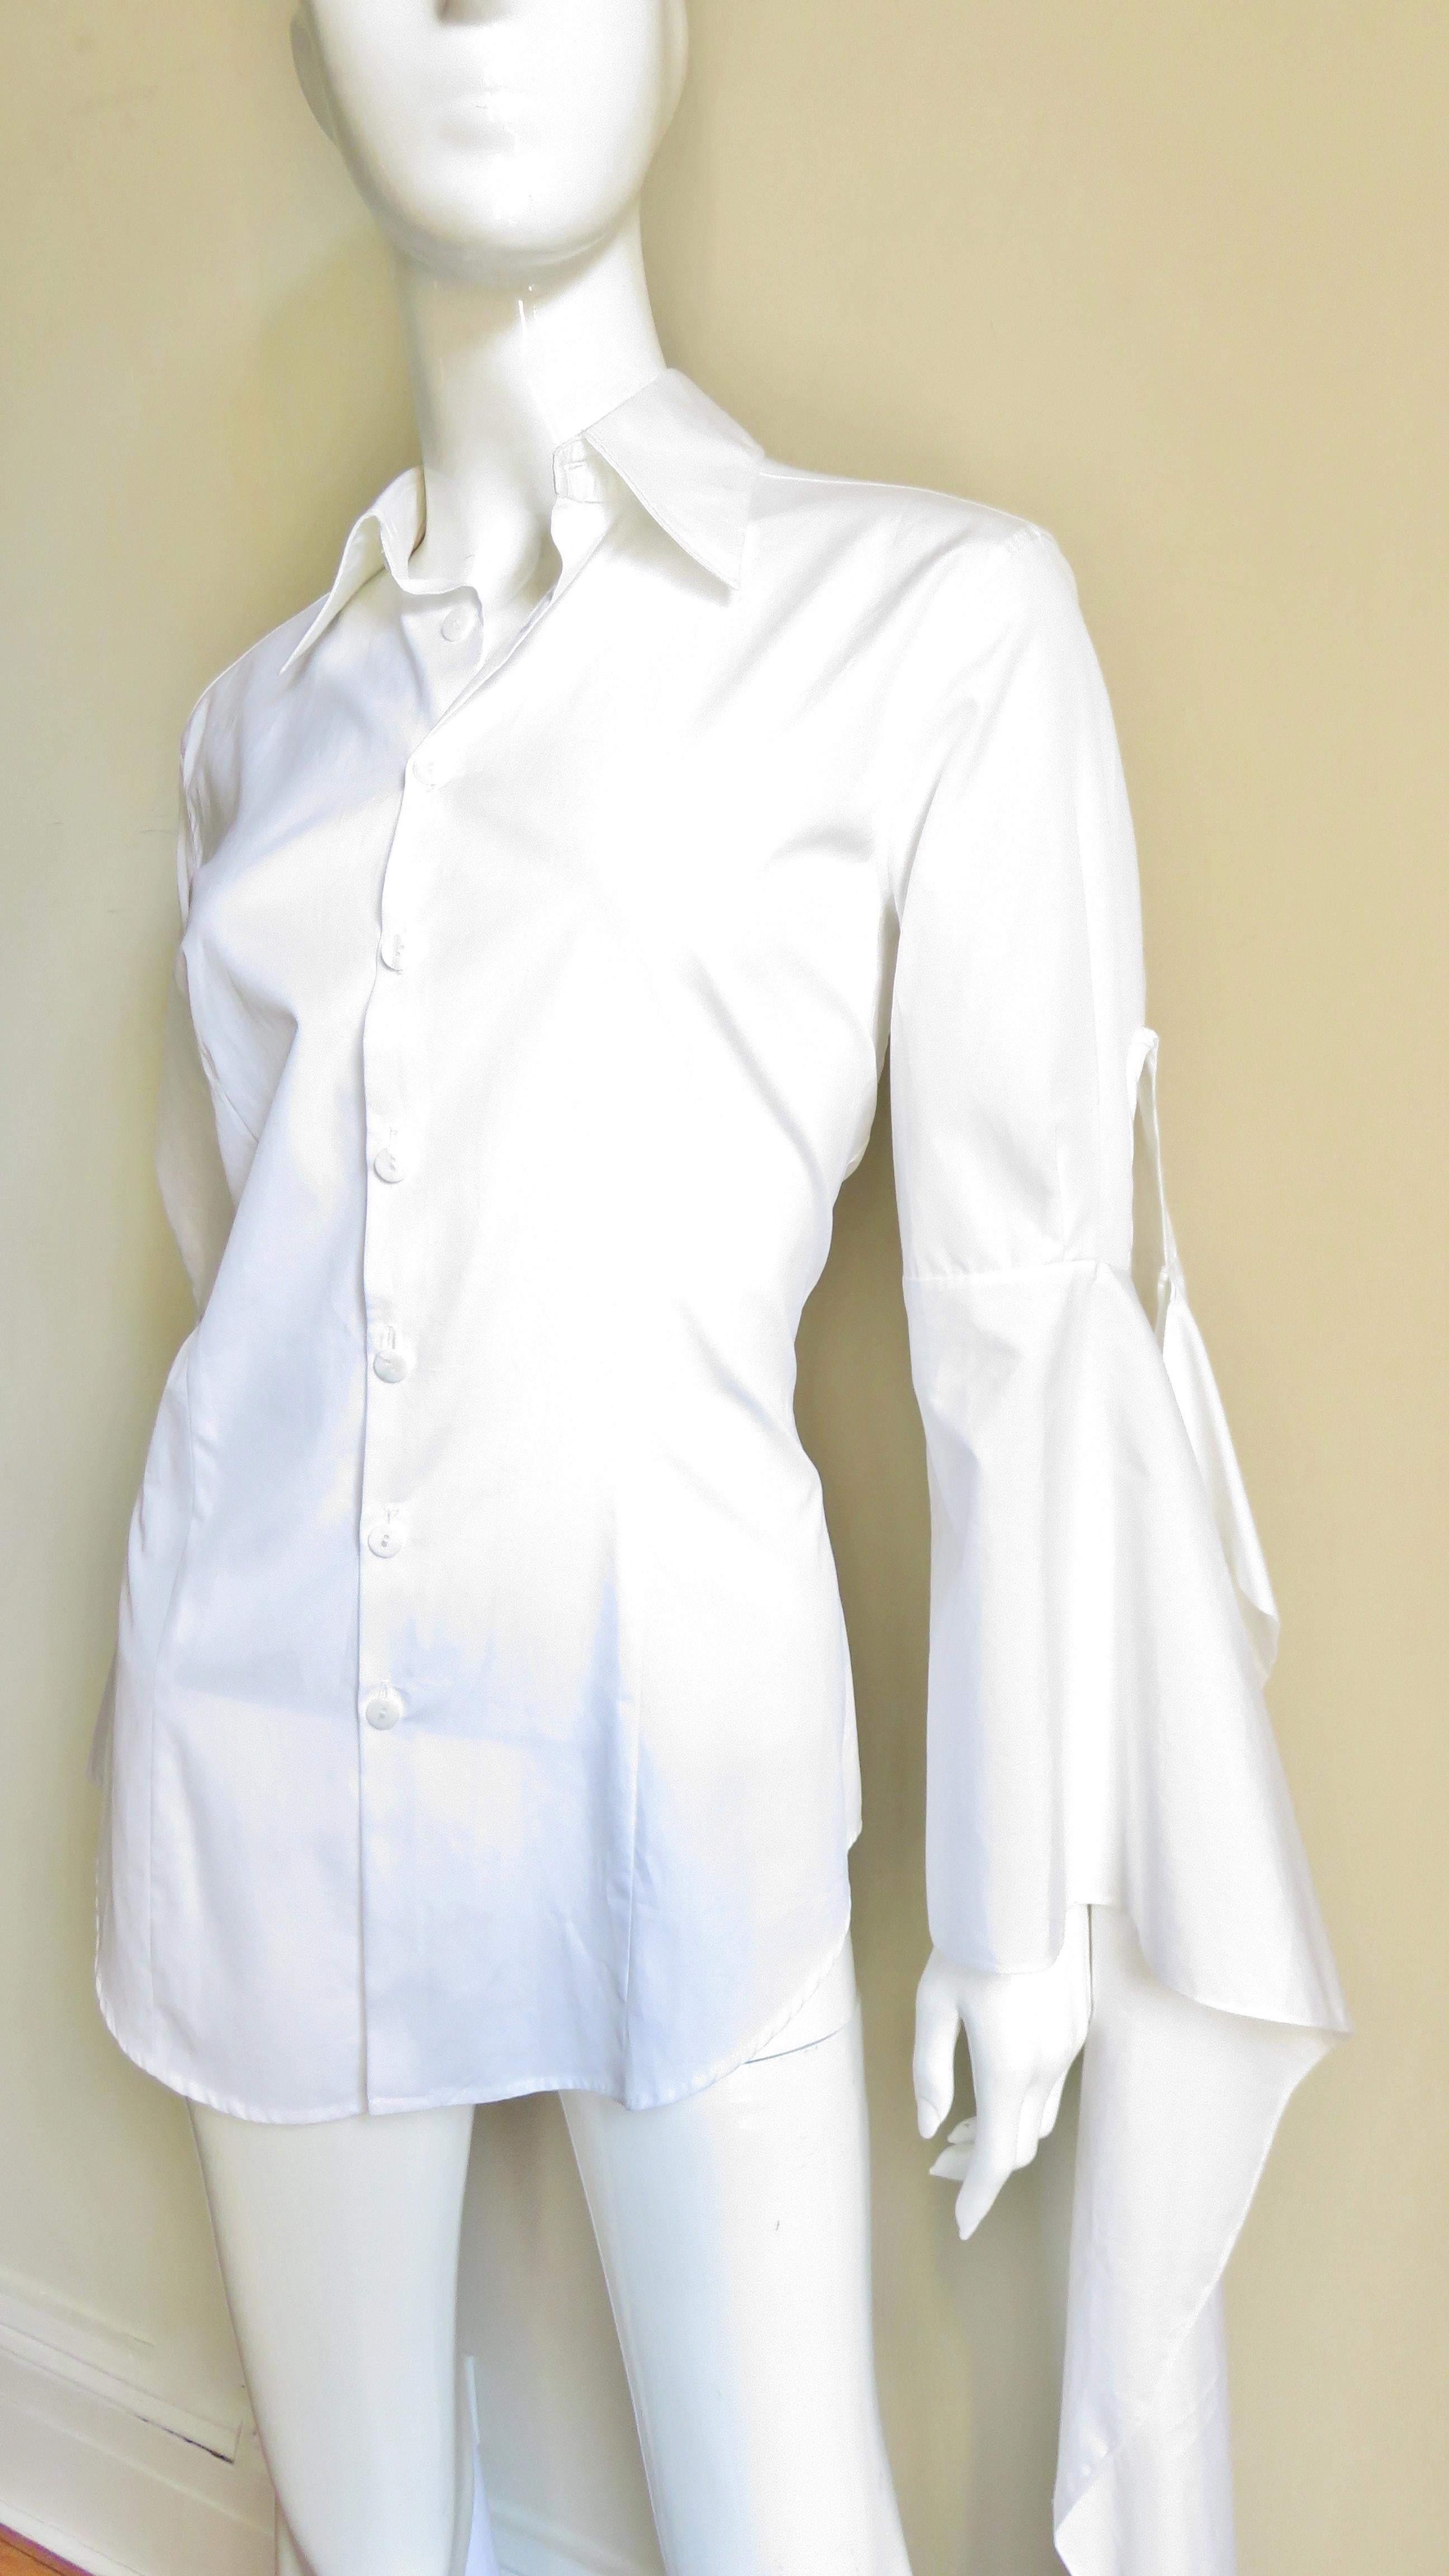 Women's Jean Paul Gaultier New Shirt with Drape Sleeves For Sale